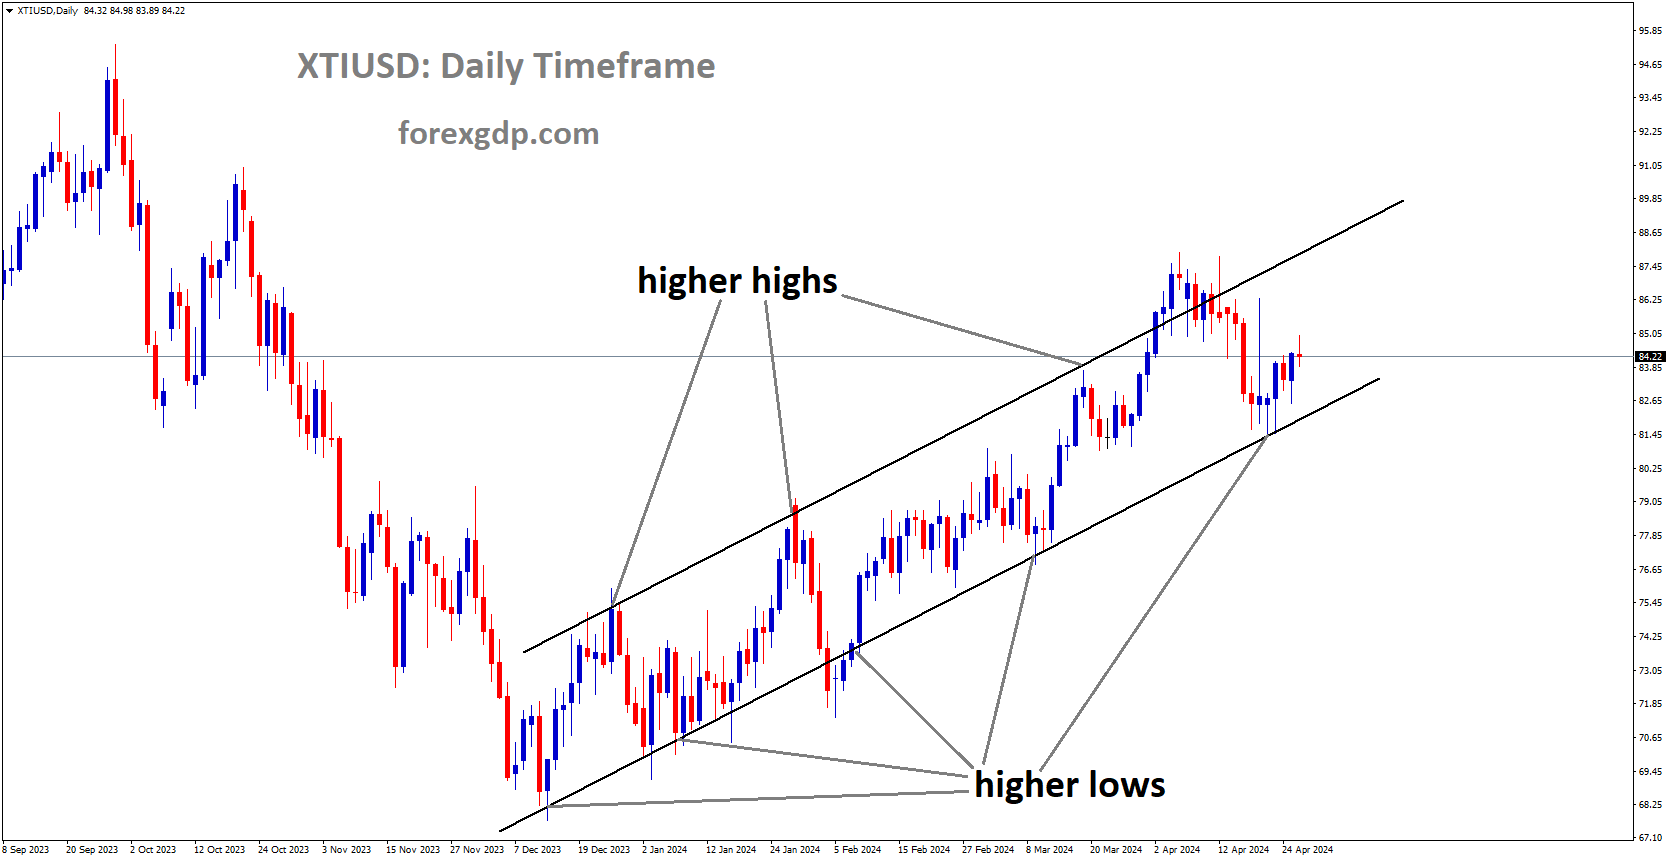 XTIUSD is moving in Ascending channel and market has rebounded from the higher low area of the channel